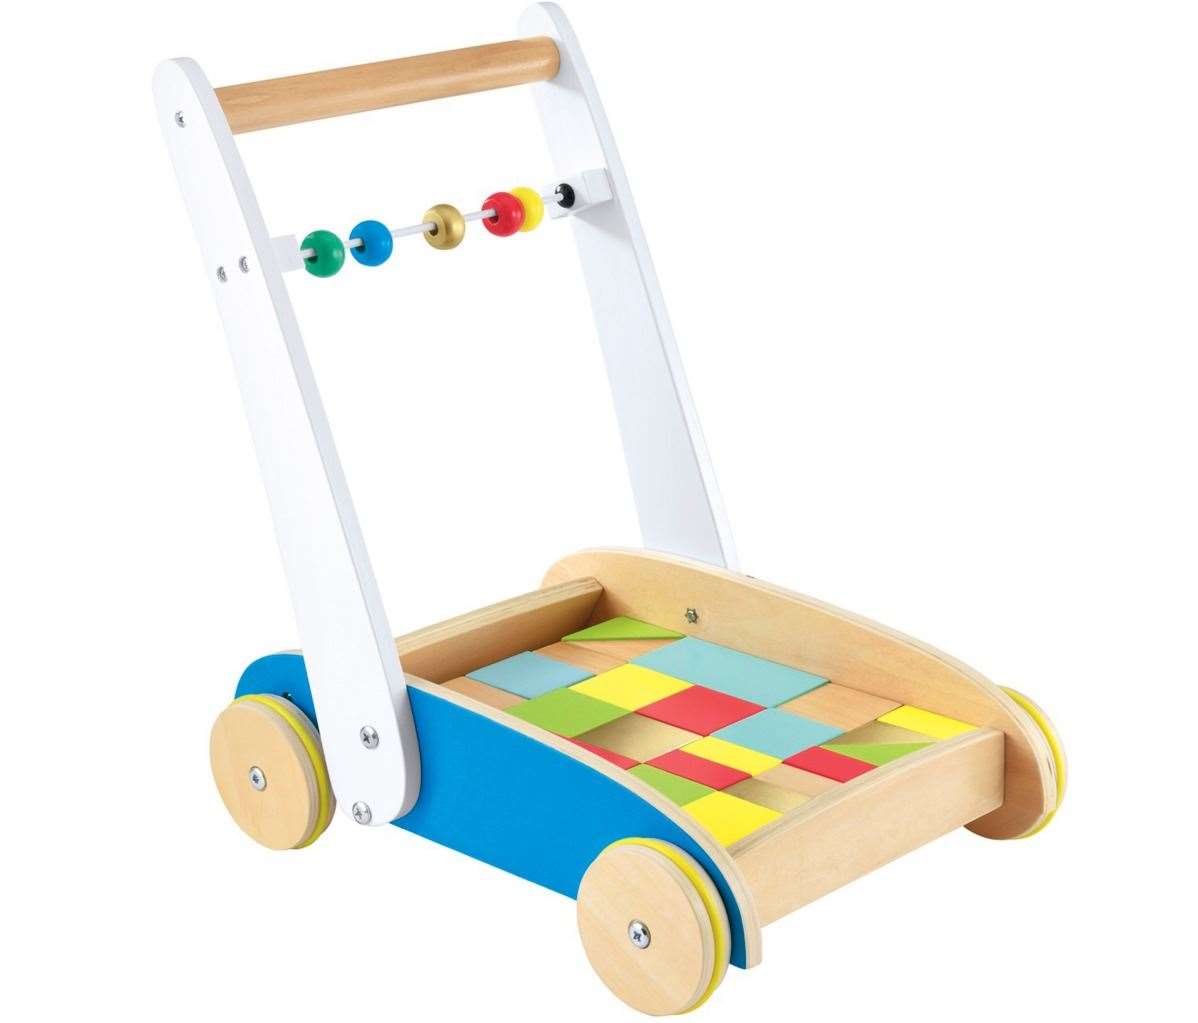 The Early Learning Centre wooden Toddle Truck is £39.99